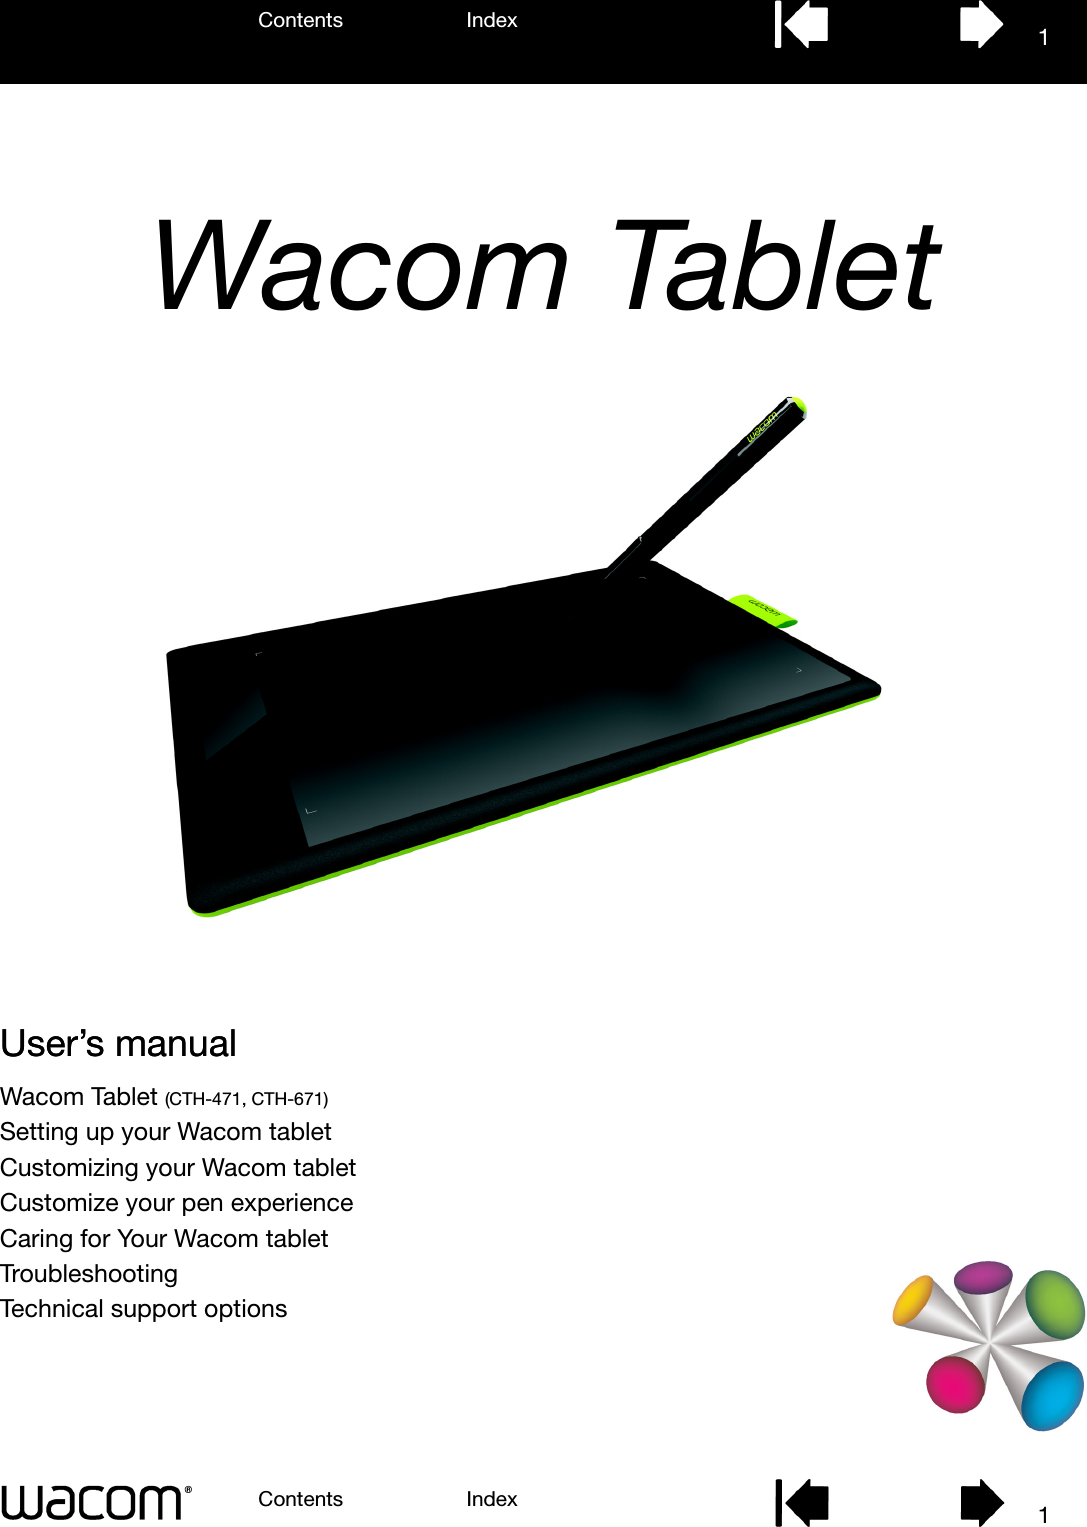 User’s manualWacom Tablet (CTH-471, CTH-671)Setting up your Wacom tabletCustomizing your Wacom tabletCustomize your pen experienceCaring for Your Wacom tabletTroubleshootingTechnical support optionsContents IndexContents 1Index1User’s manualWacom Tablet